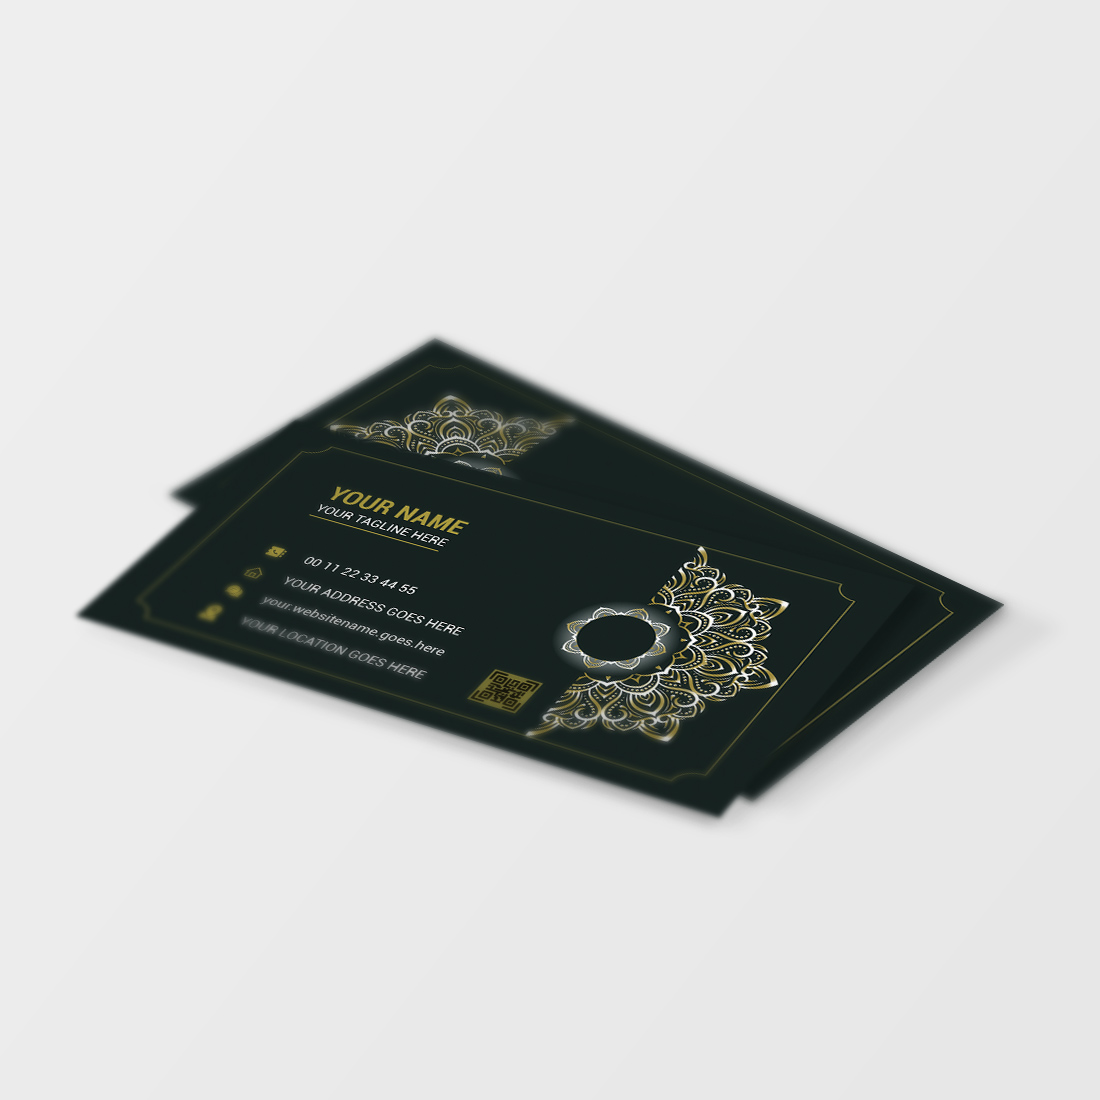 Black and gold business card on a white surface.